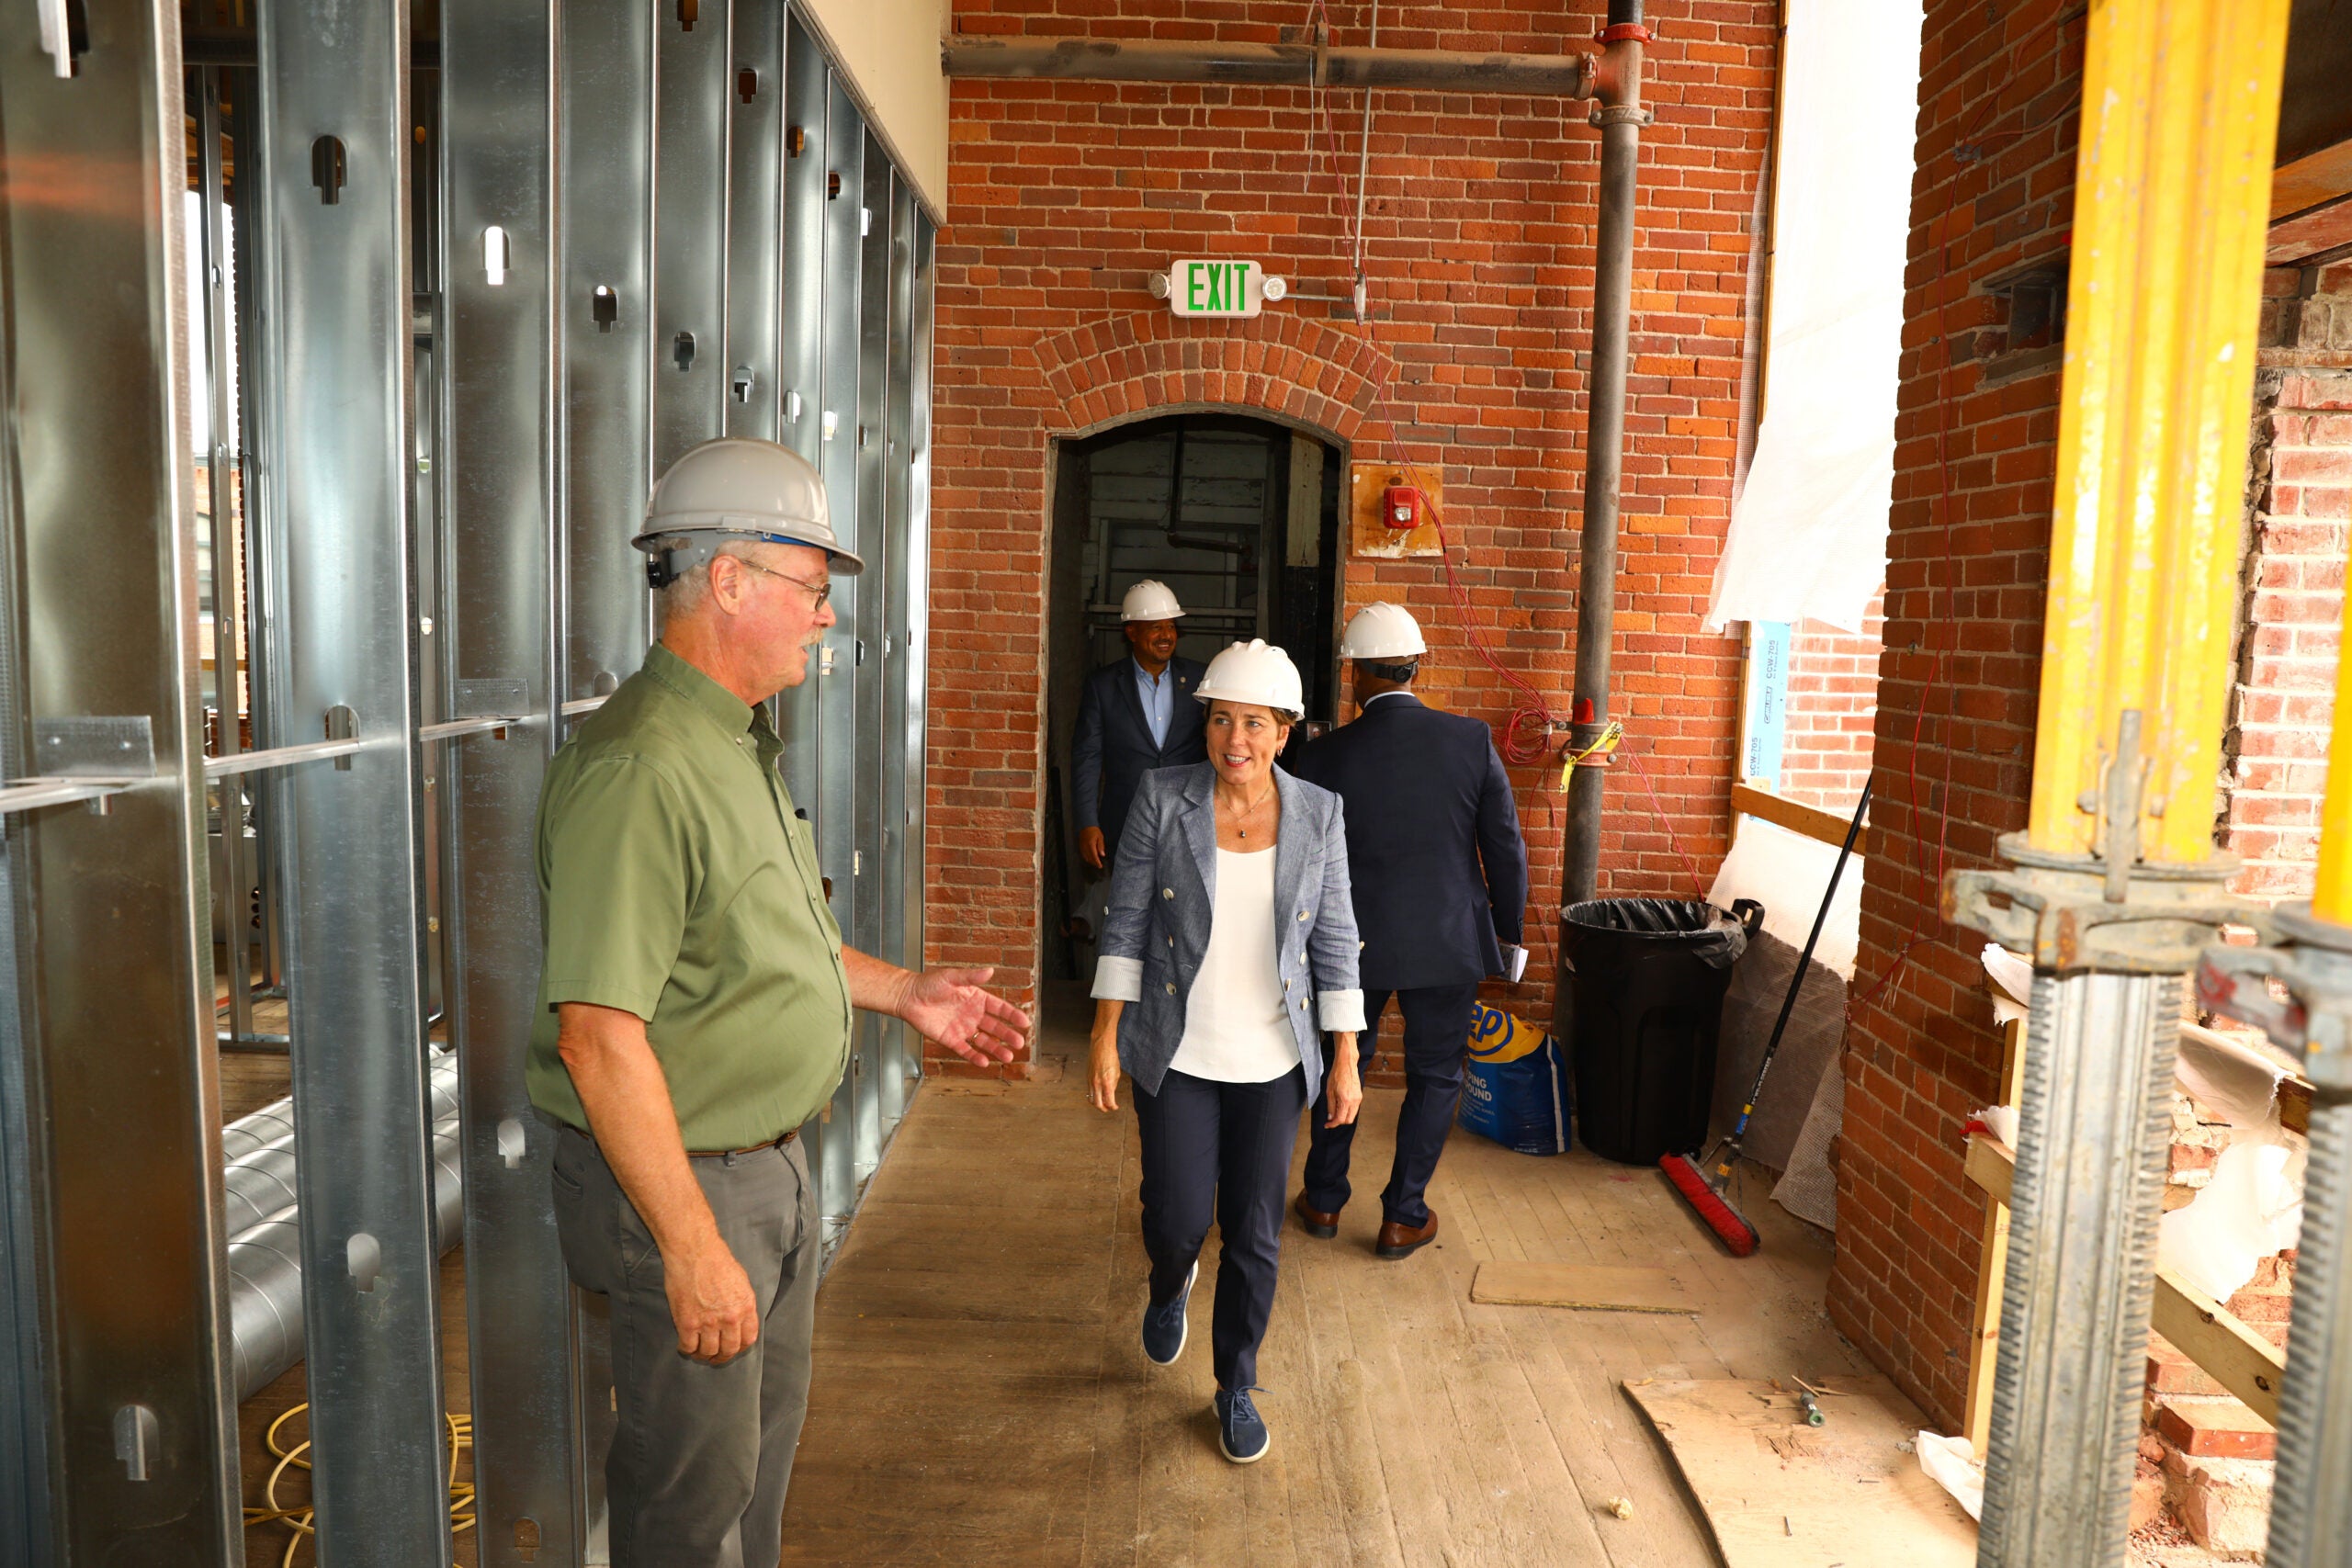 While campaigning for governor, Maura Healey toured a portion of the former Marriner Mill that’s being developed into mixed-income rental housing. On Thursday, Healey filed her first piece of legislation, targeting infrastructure, economic development, and housing.